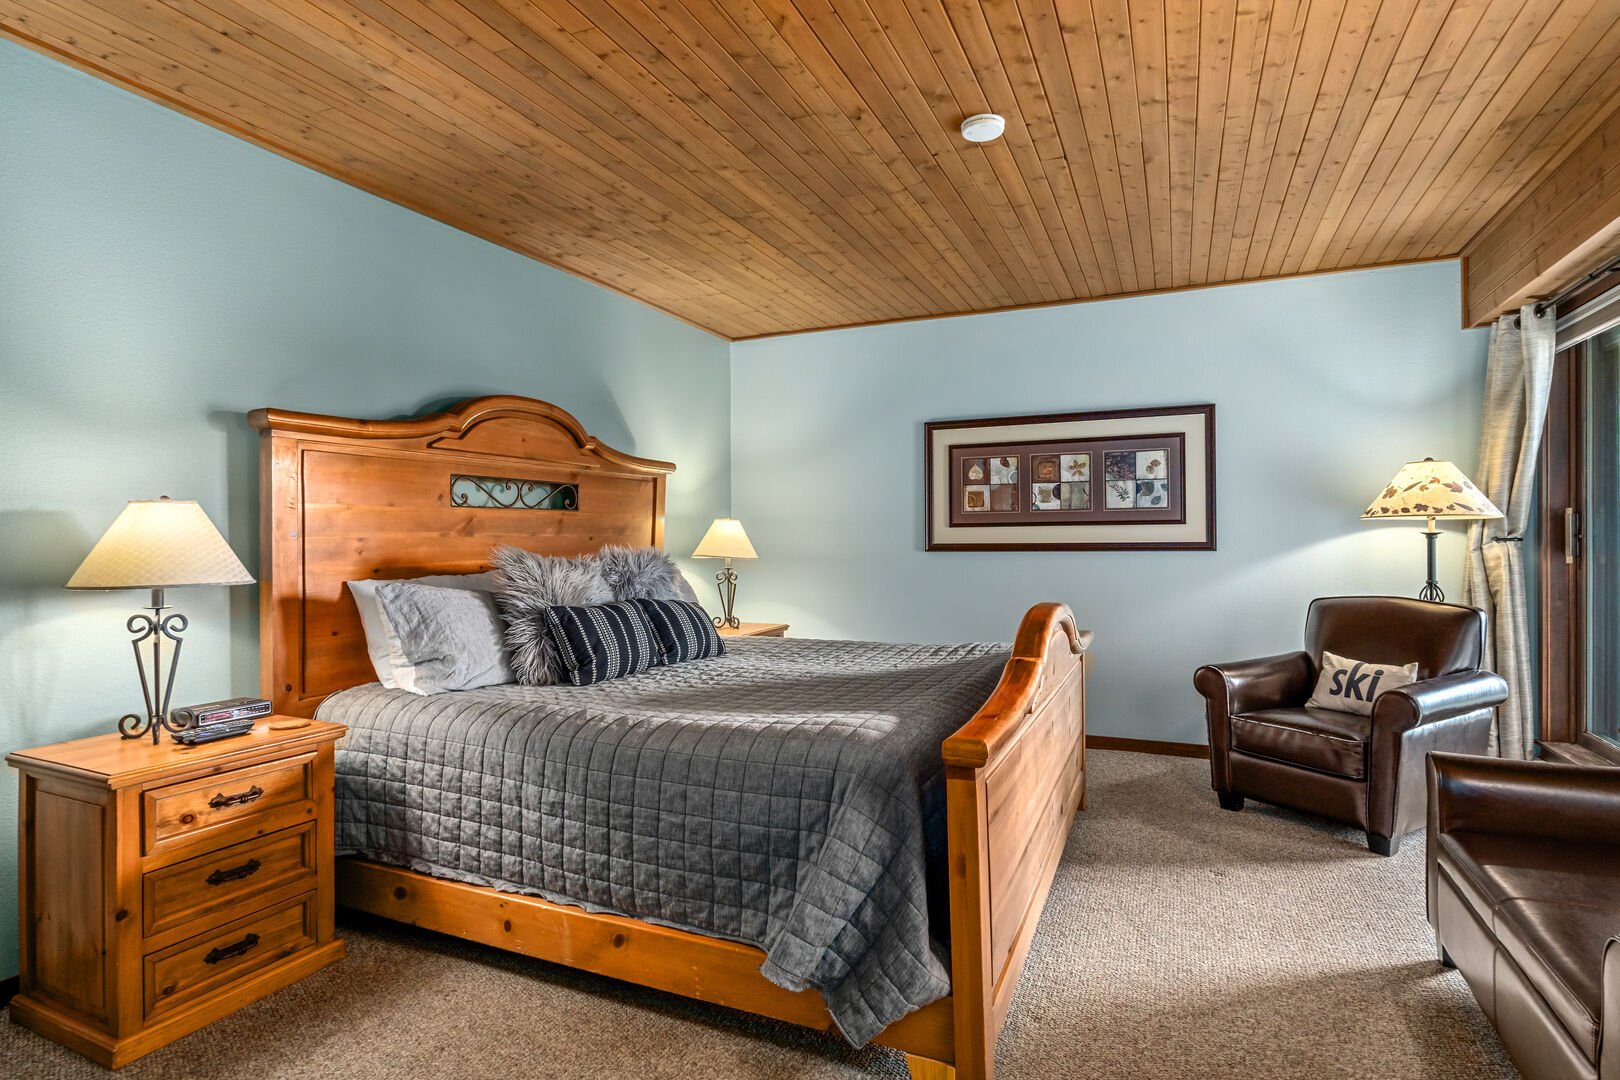 A king bed with large wood frame centers the primary bedroom suite